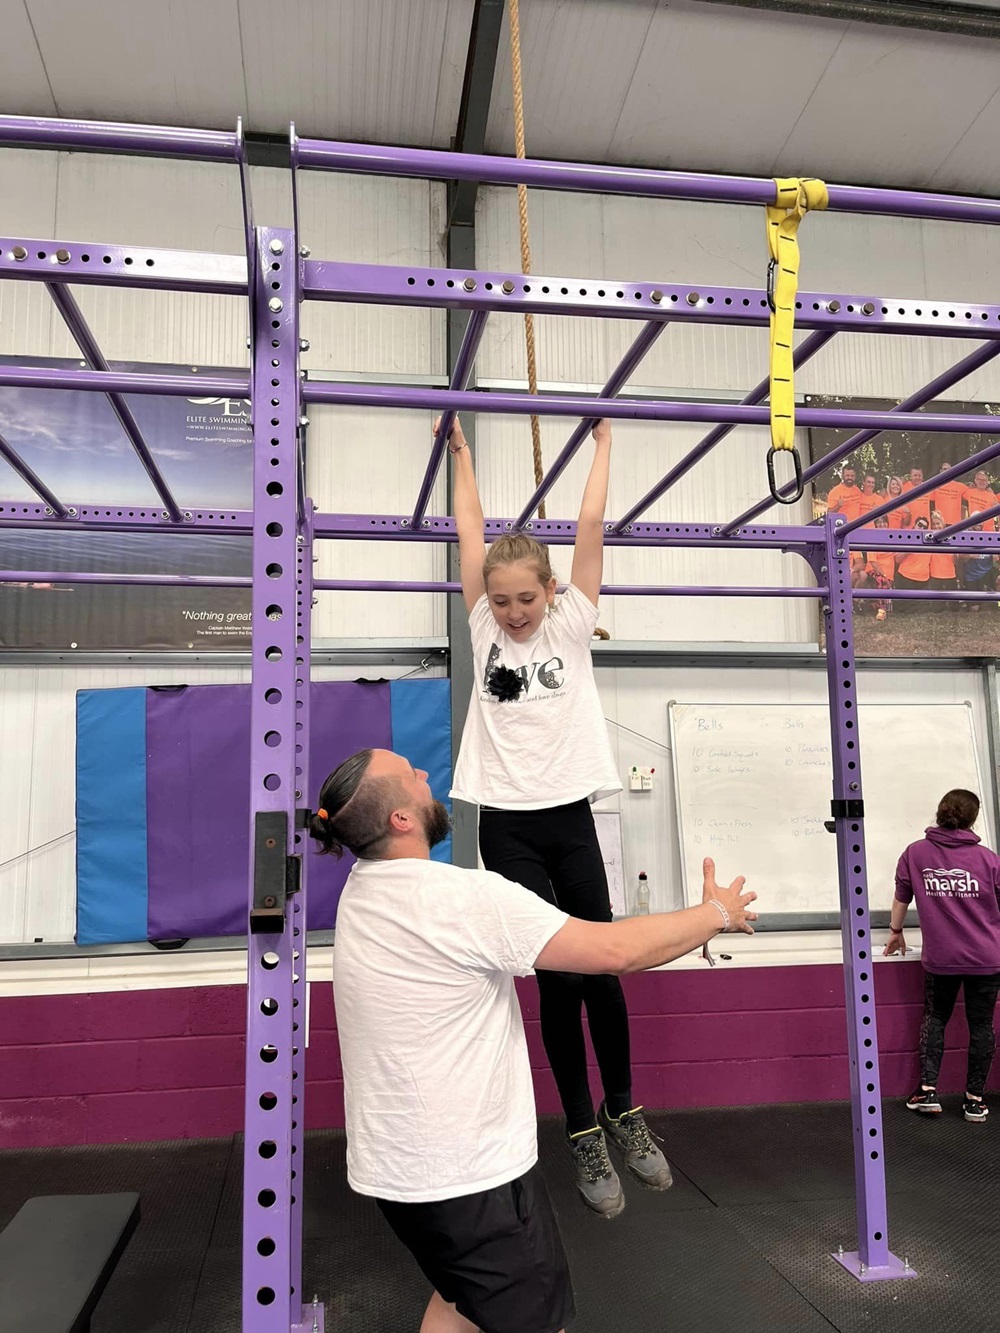 Girl on monkey bars being held up by a man 